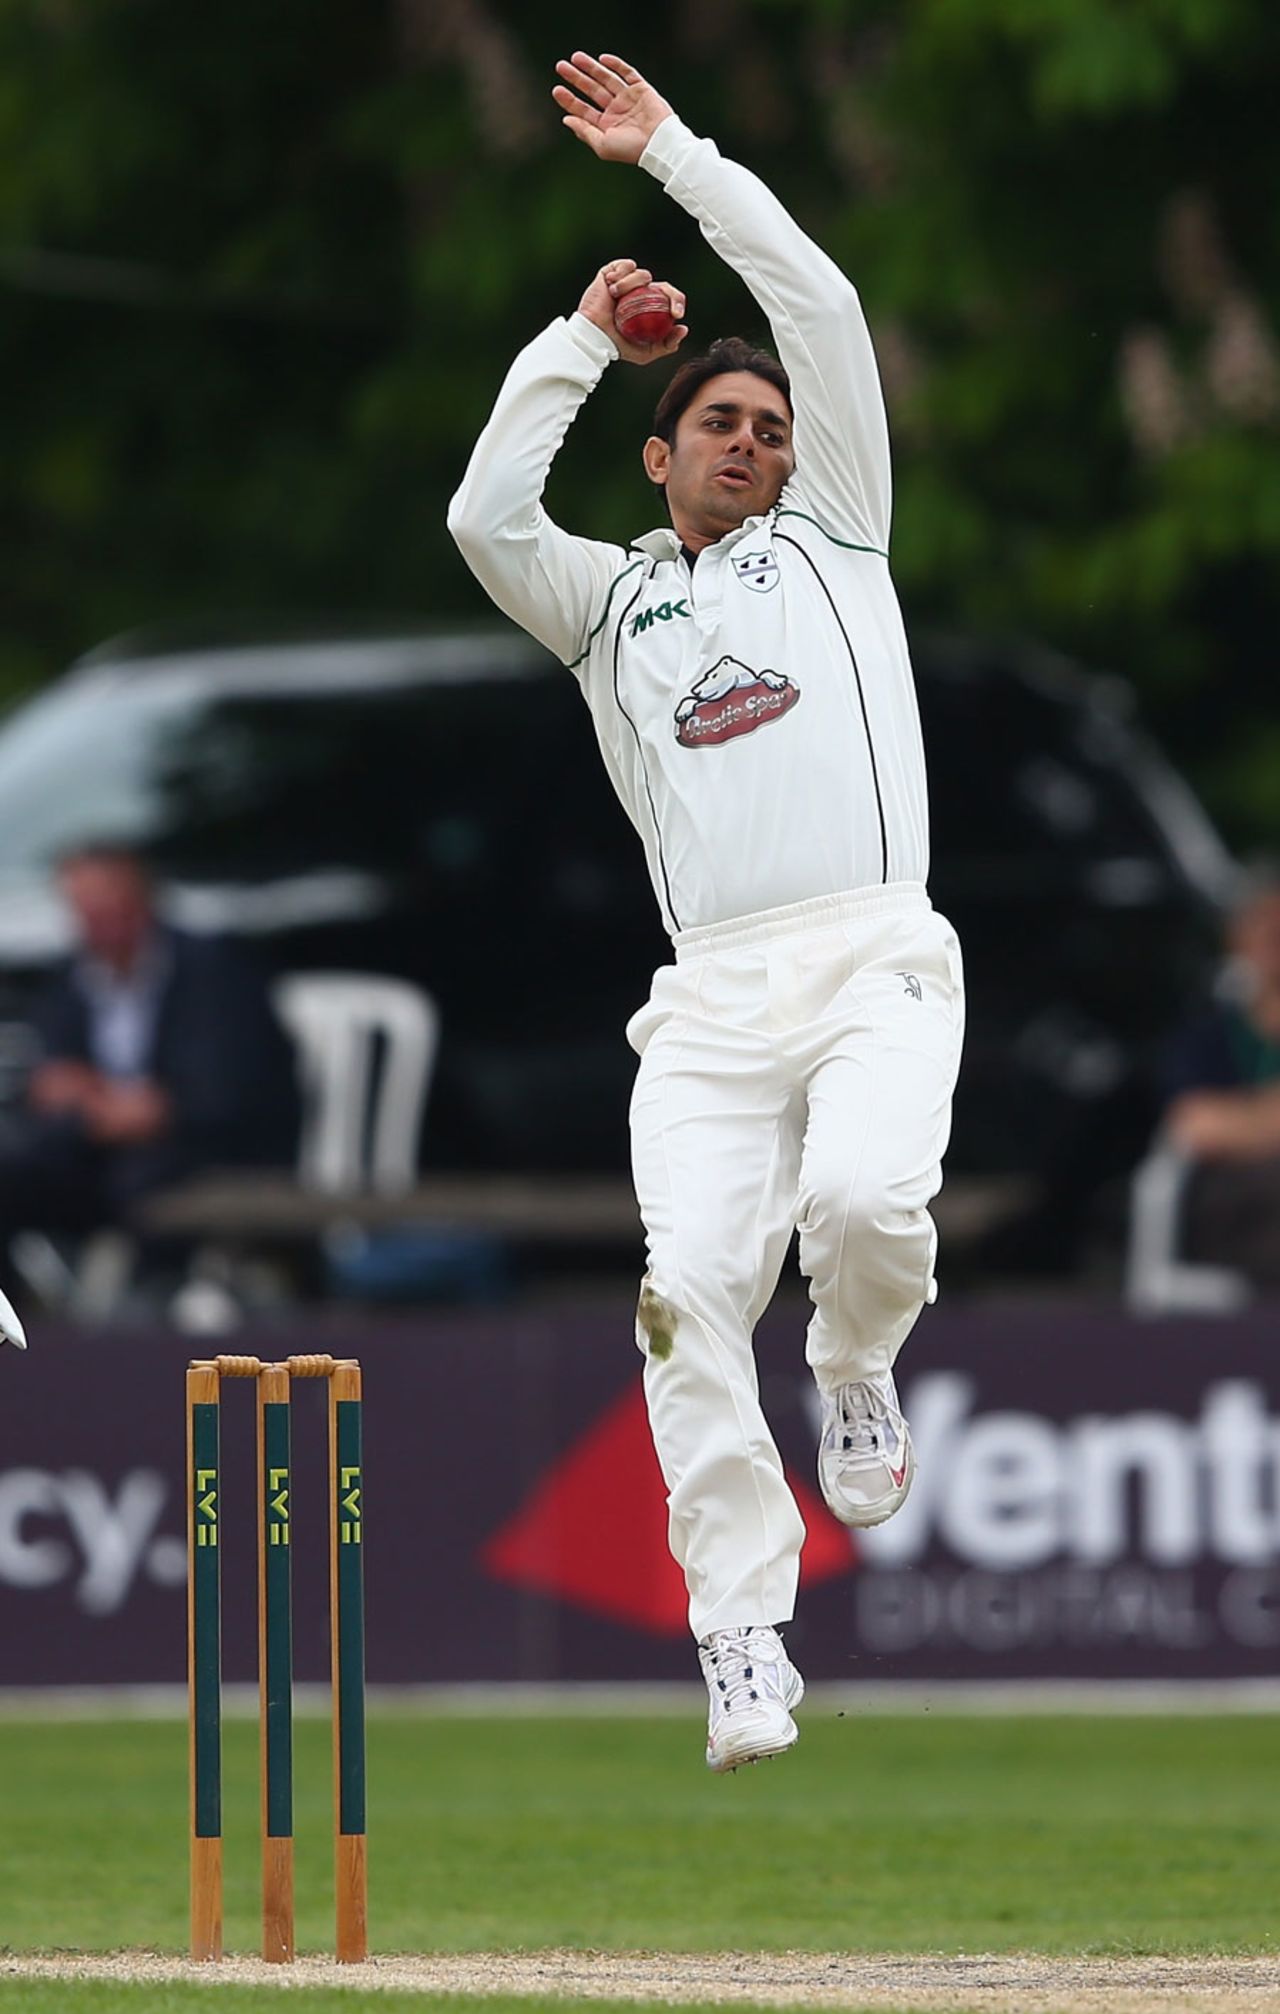 Saeed Ajmal claimed match figures of 13 for 94, Worcestershire v Essex, County Championship, Division Two, 3rd day, May 20, 2014